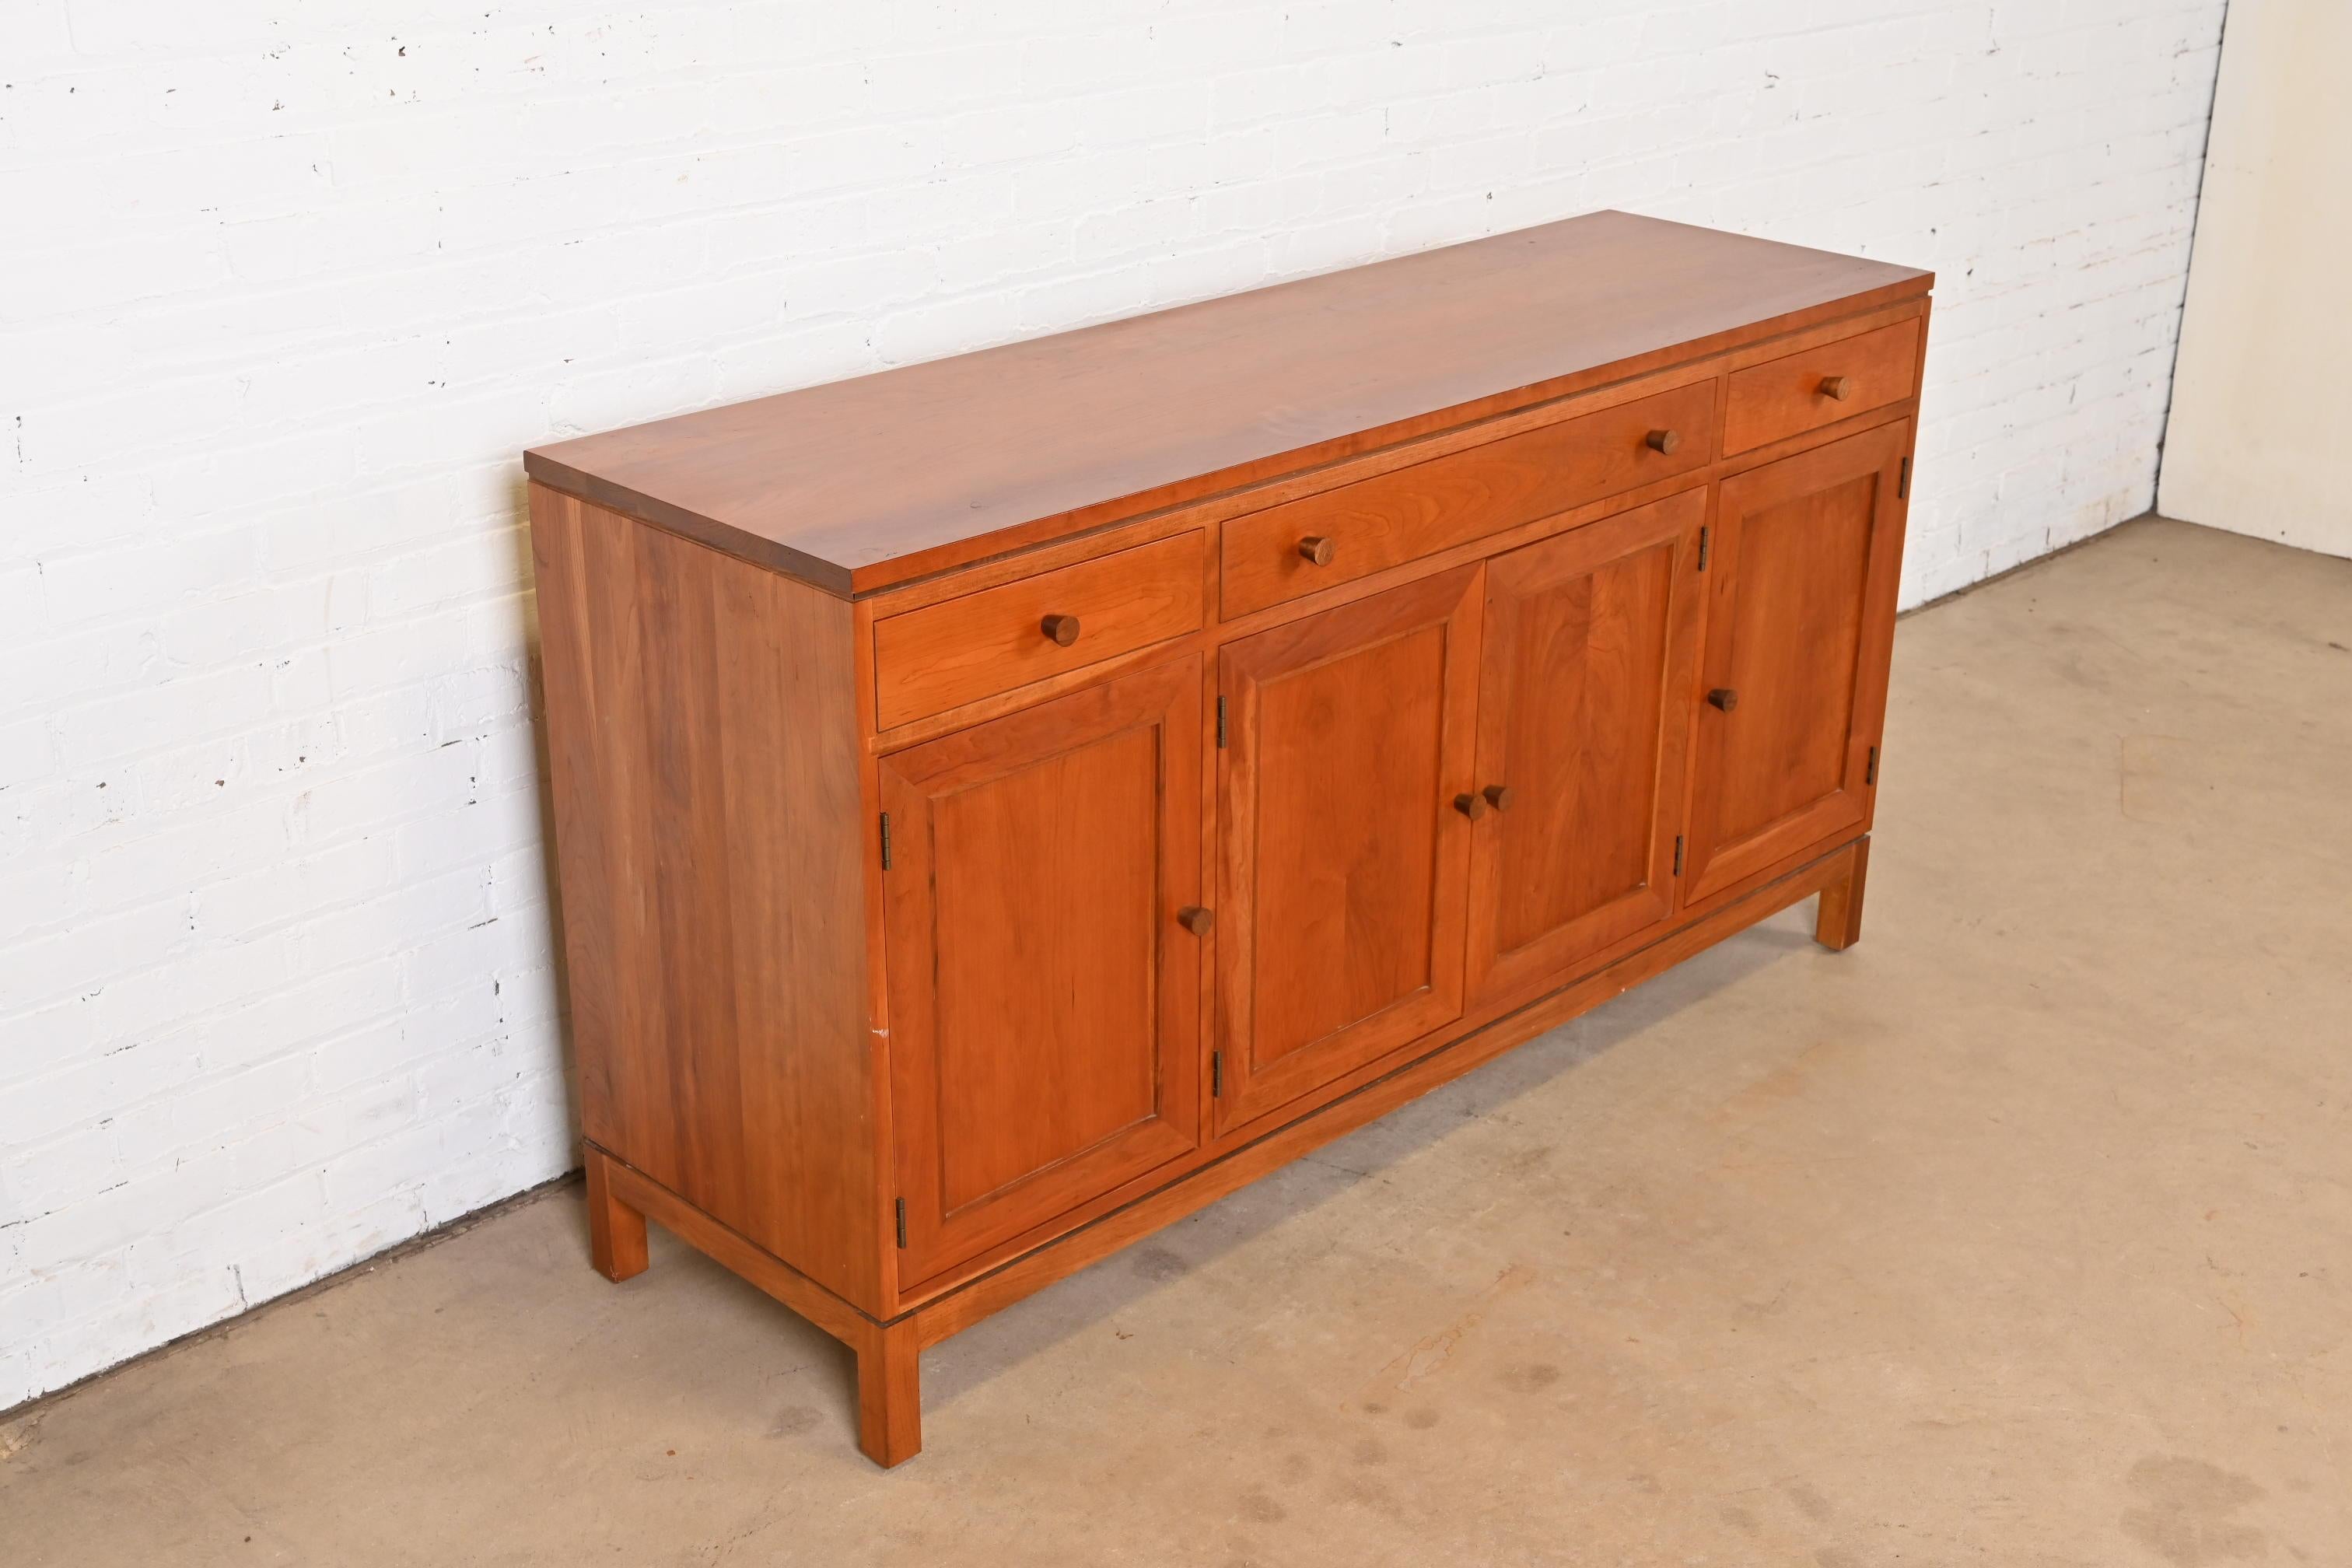 Stickley Arts & Crafts Shaker Cherry Wood Sideboard or Bar Cabinet In Good Condition For Sale In South Bend, IN